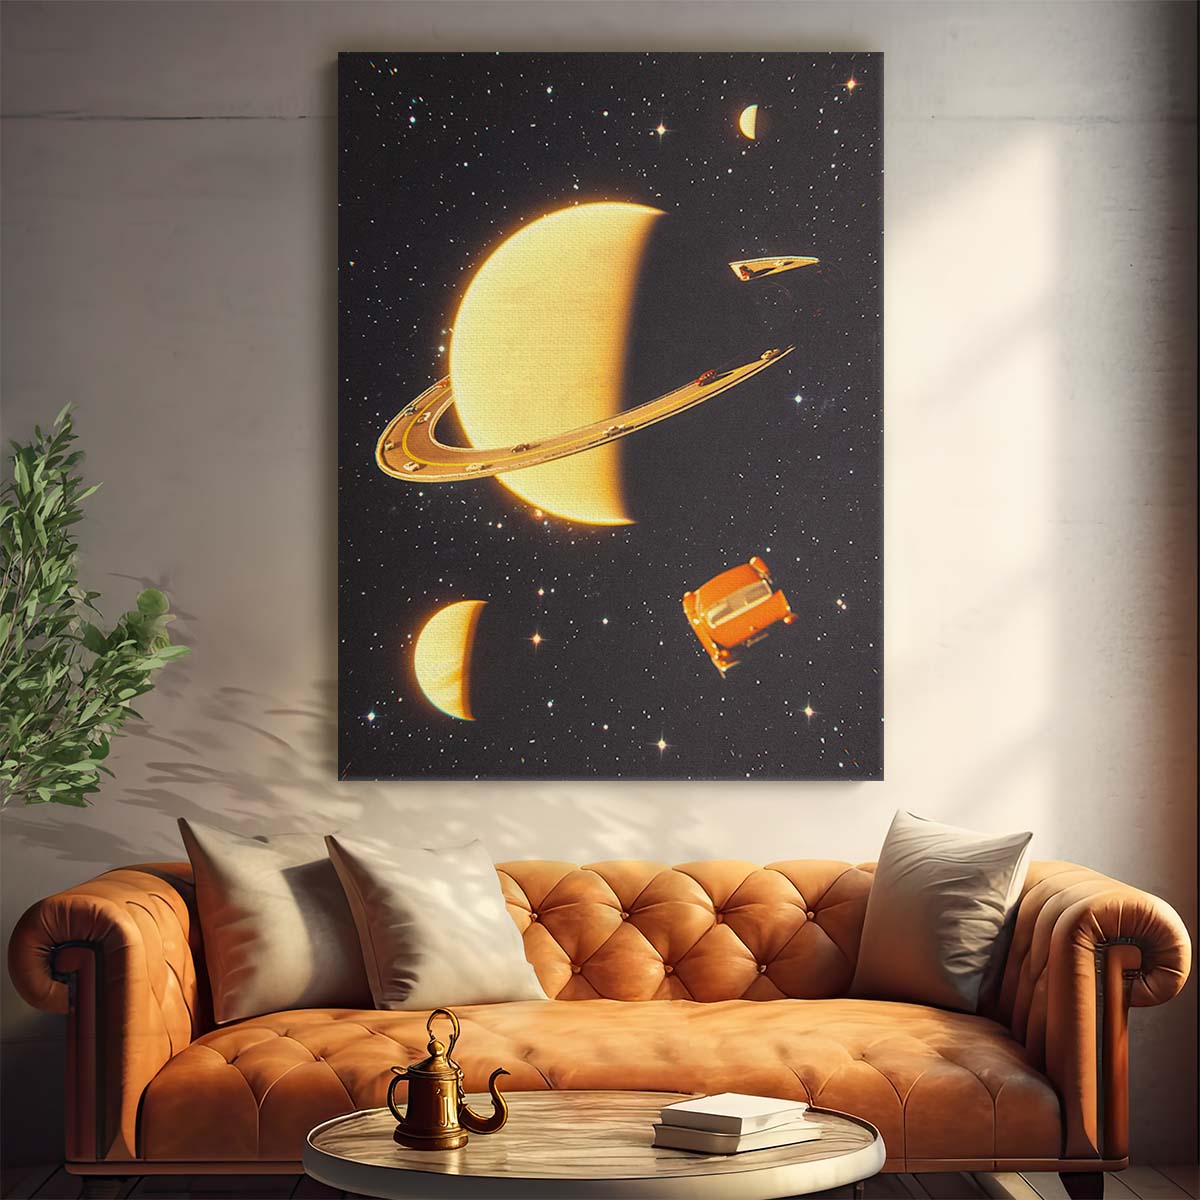 Surreal Saturn Rings Illustration, Retro Futuristic Space Collage Art by Luxuriance Designs, made in USA